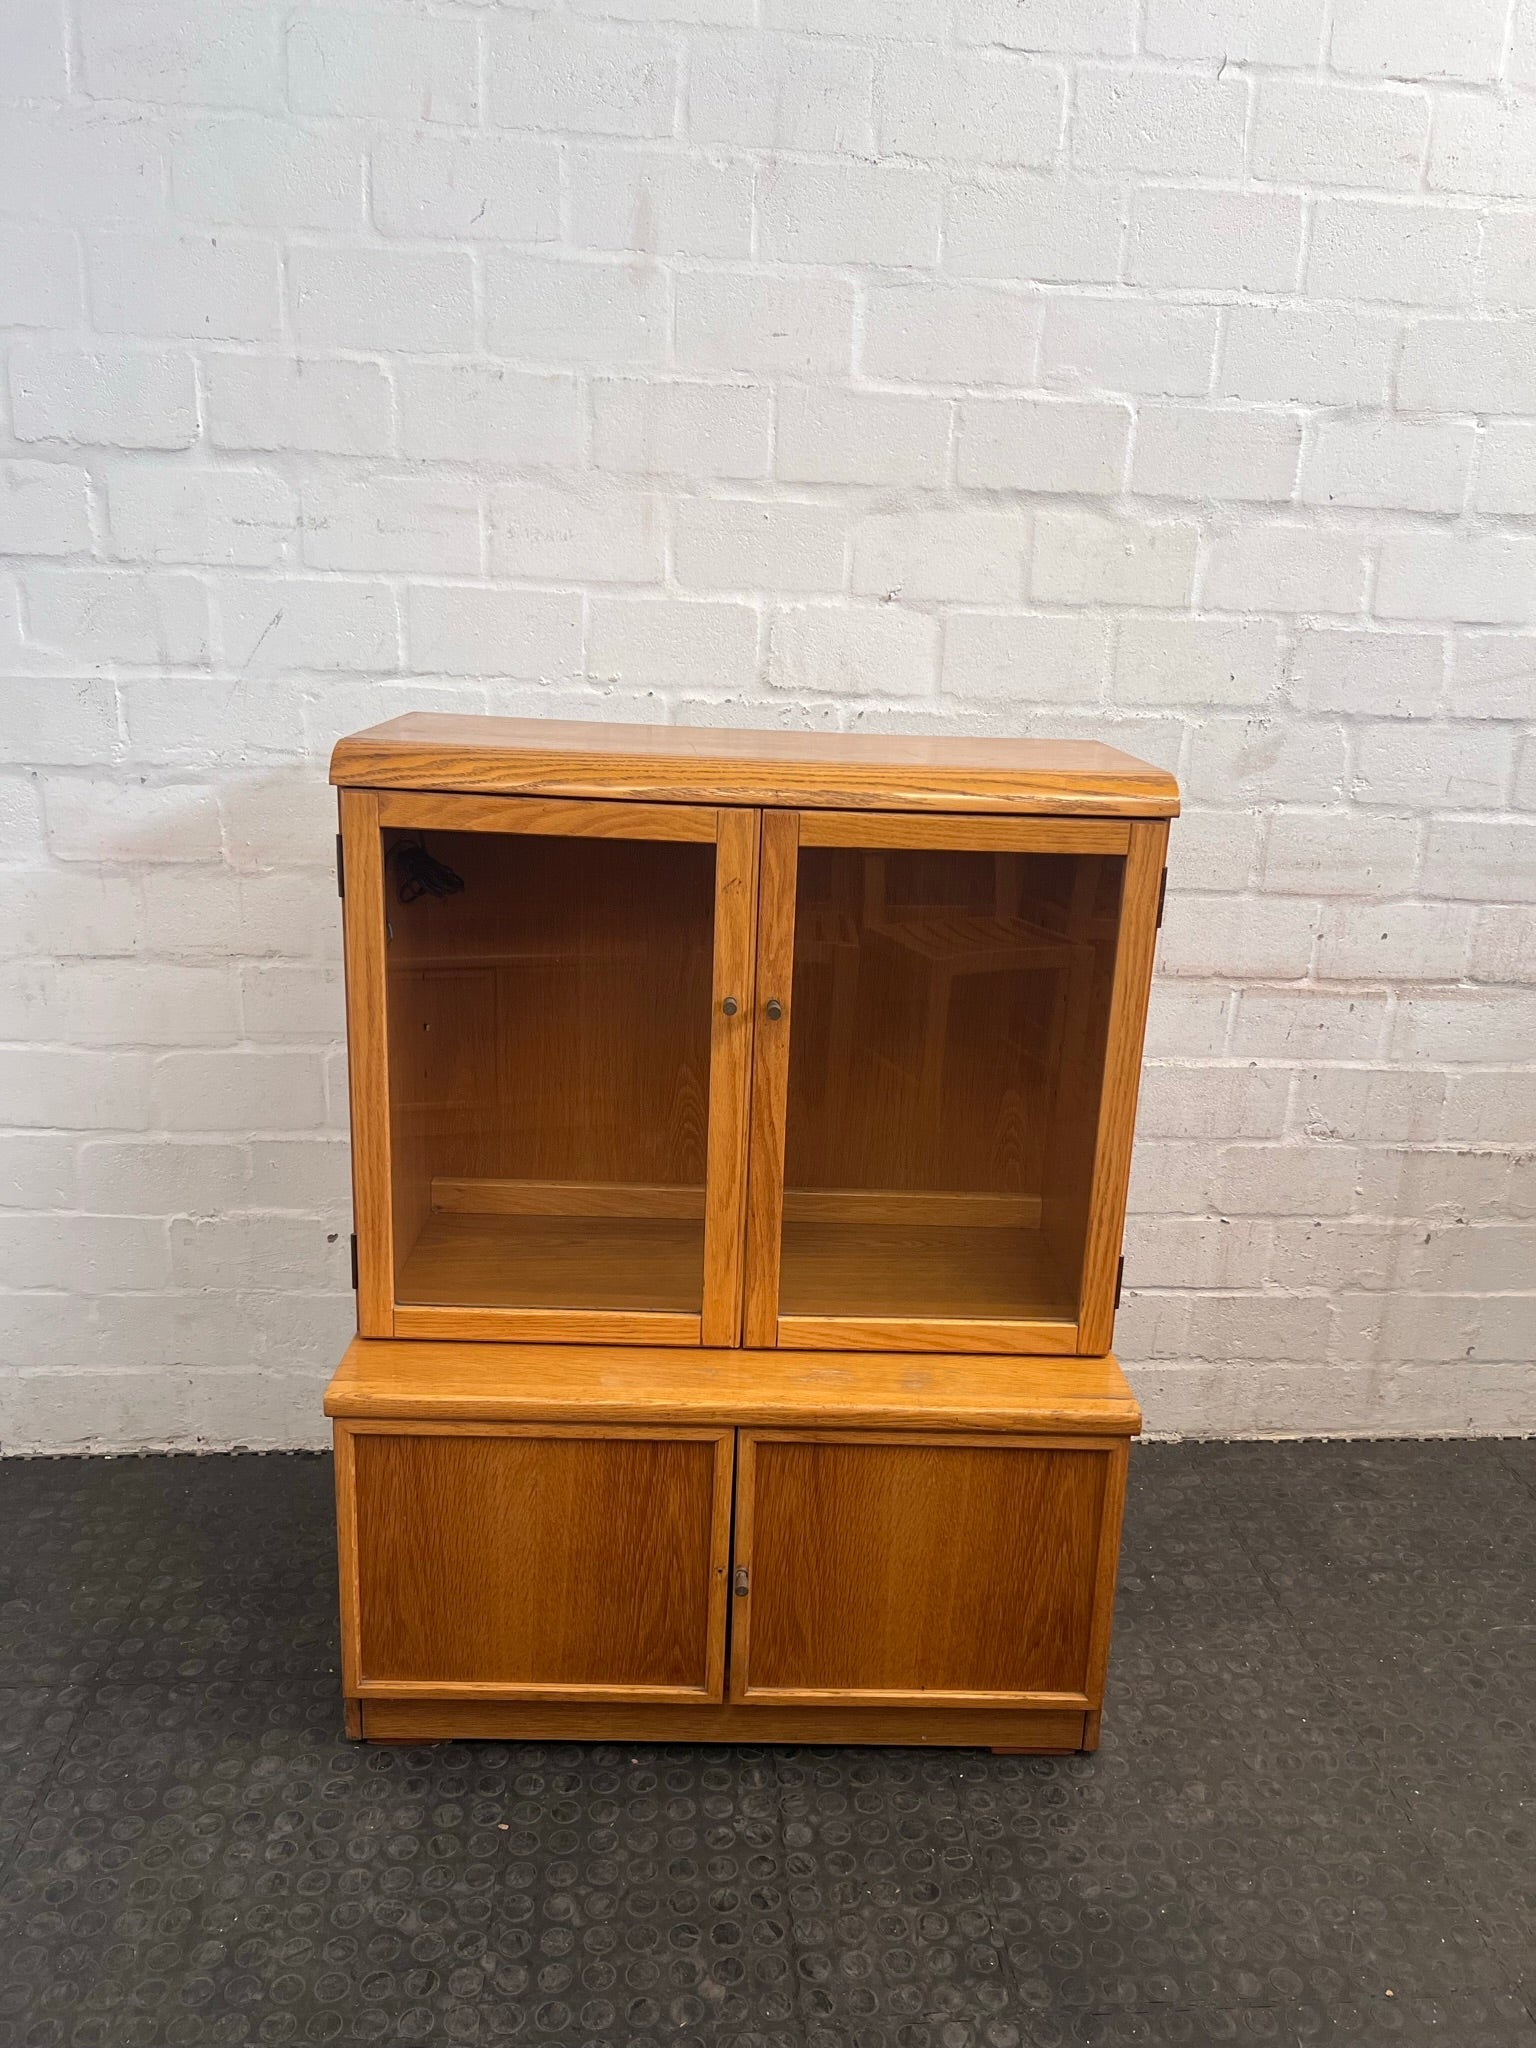 Four Door Display Cabinet with Shelf - REDUCED